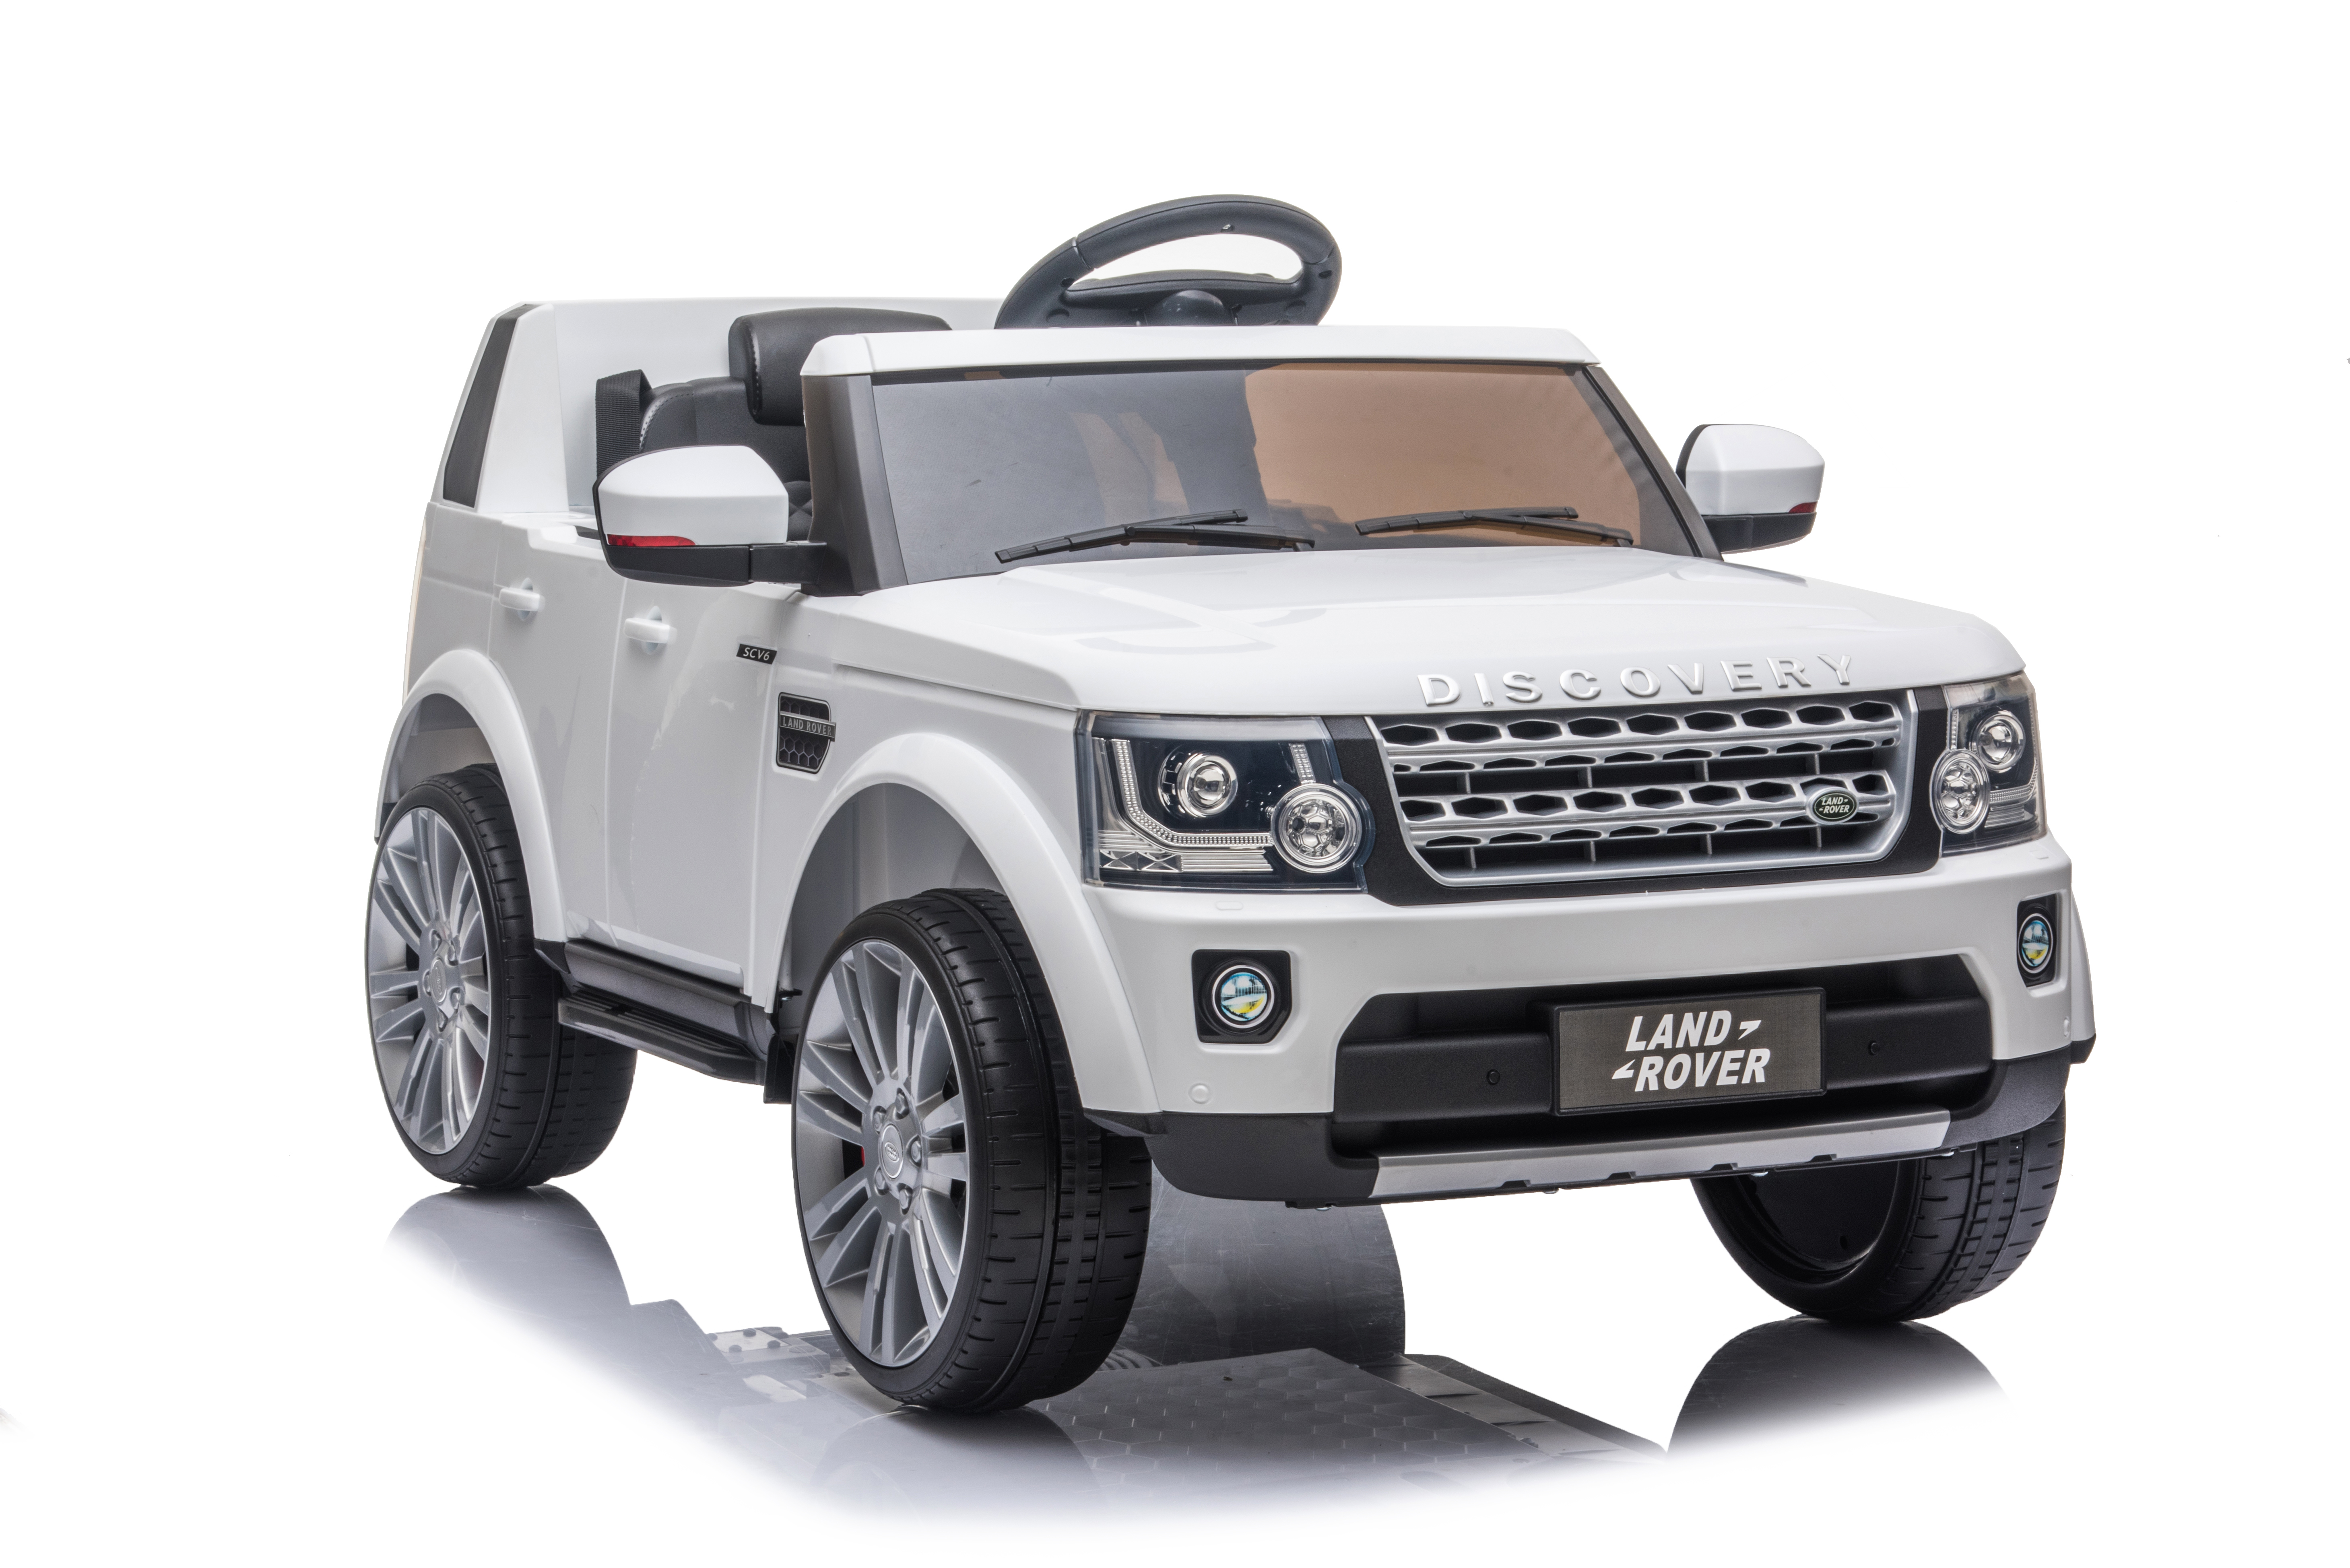 【PATENTED PRODUCT, DEALERSHIP CERTIFICATE NEEDE】Official Licensed Children Ride-on Car,12V 3.7 MPH 1-Seater Licensed Land Rover Ride On w/ Parent Remote Control, MP3 Player-Boyel Living